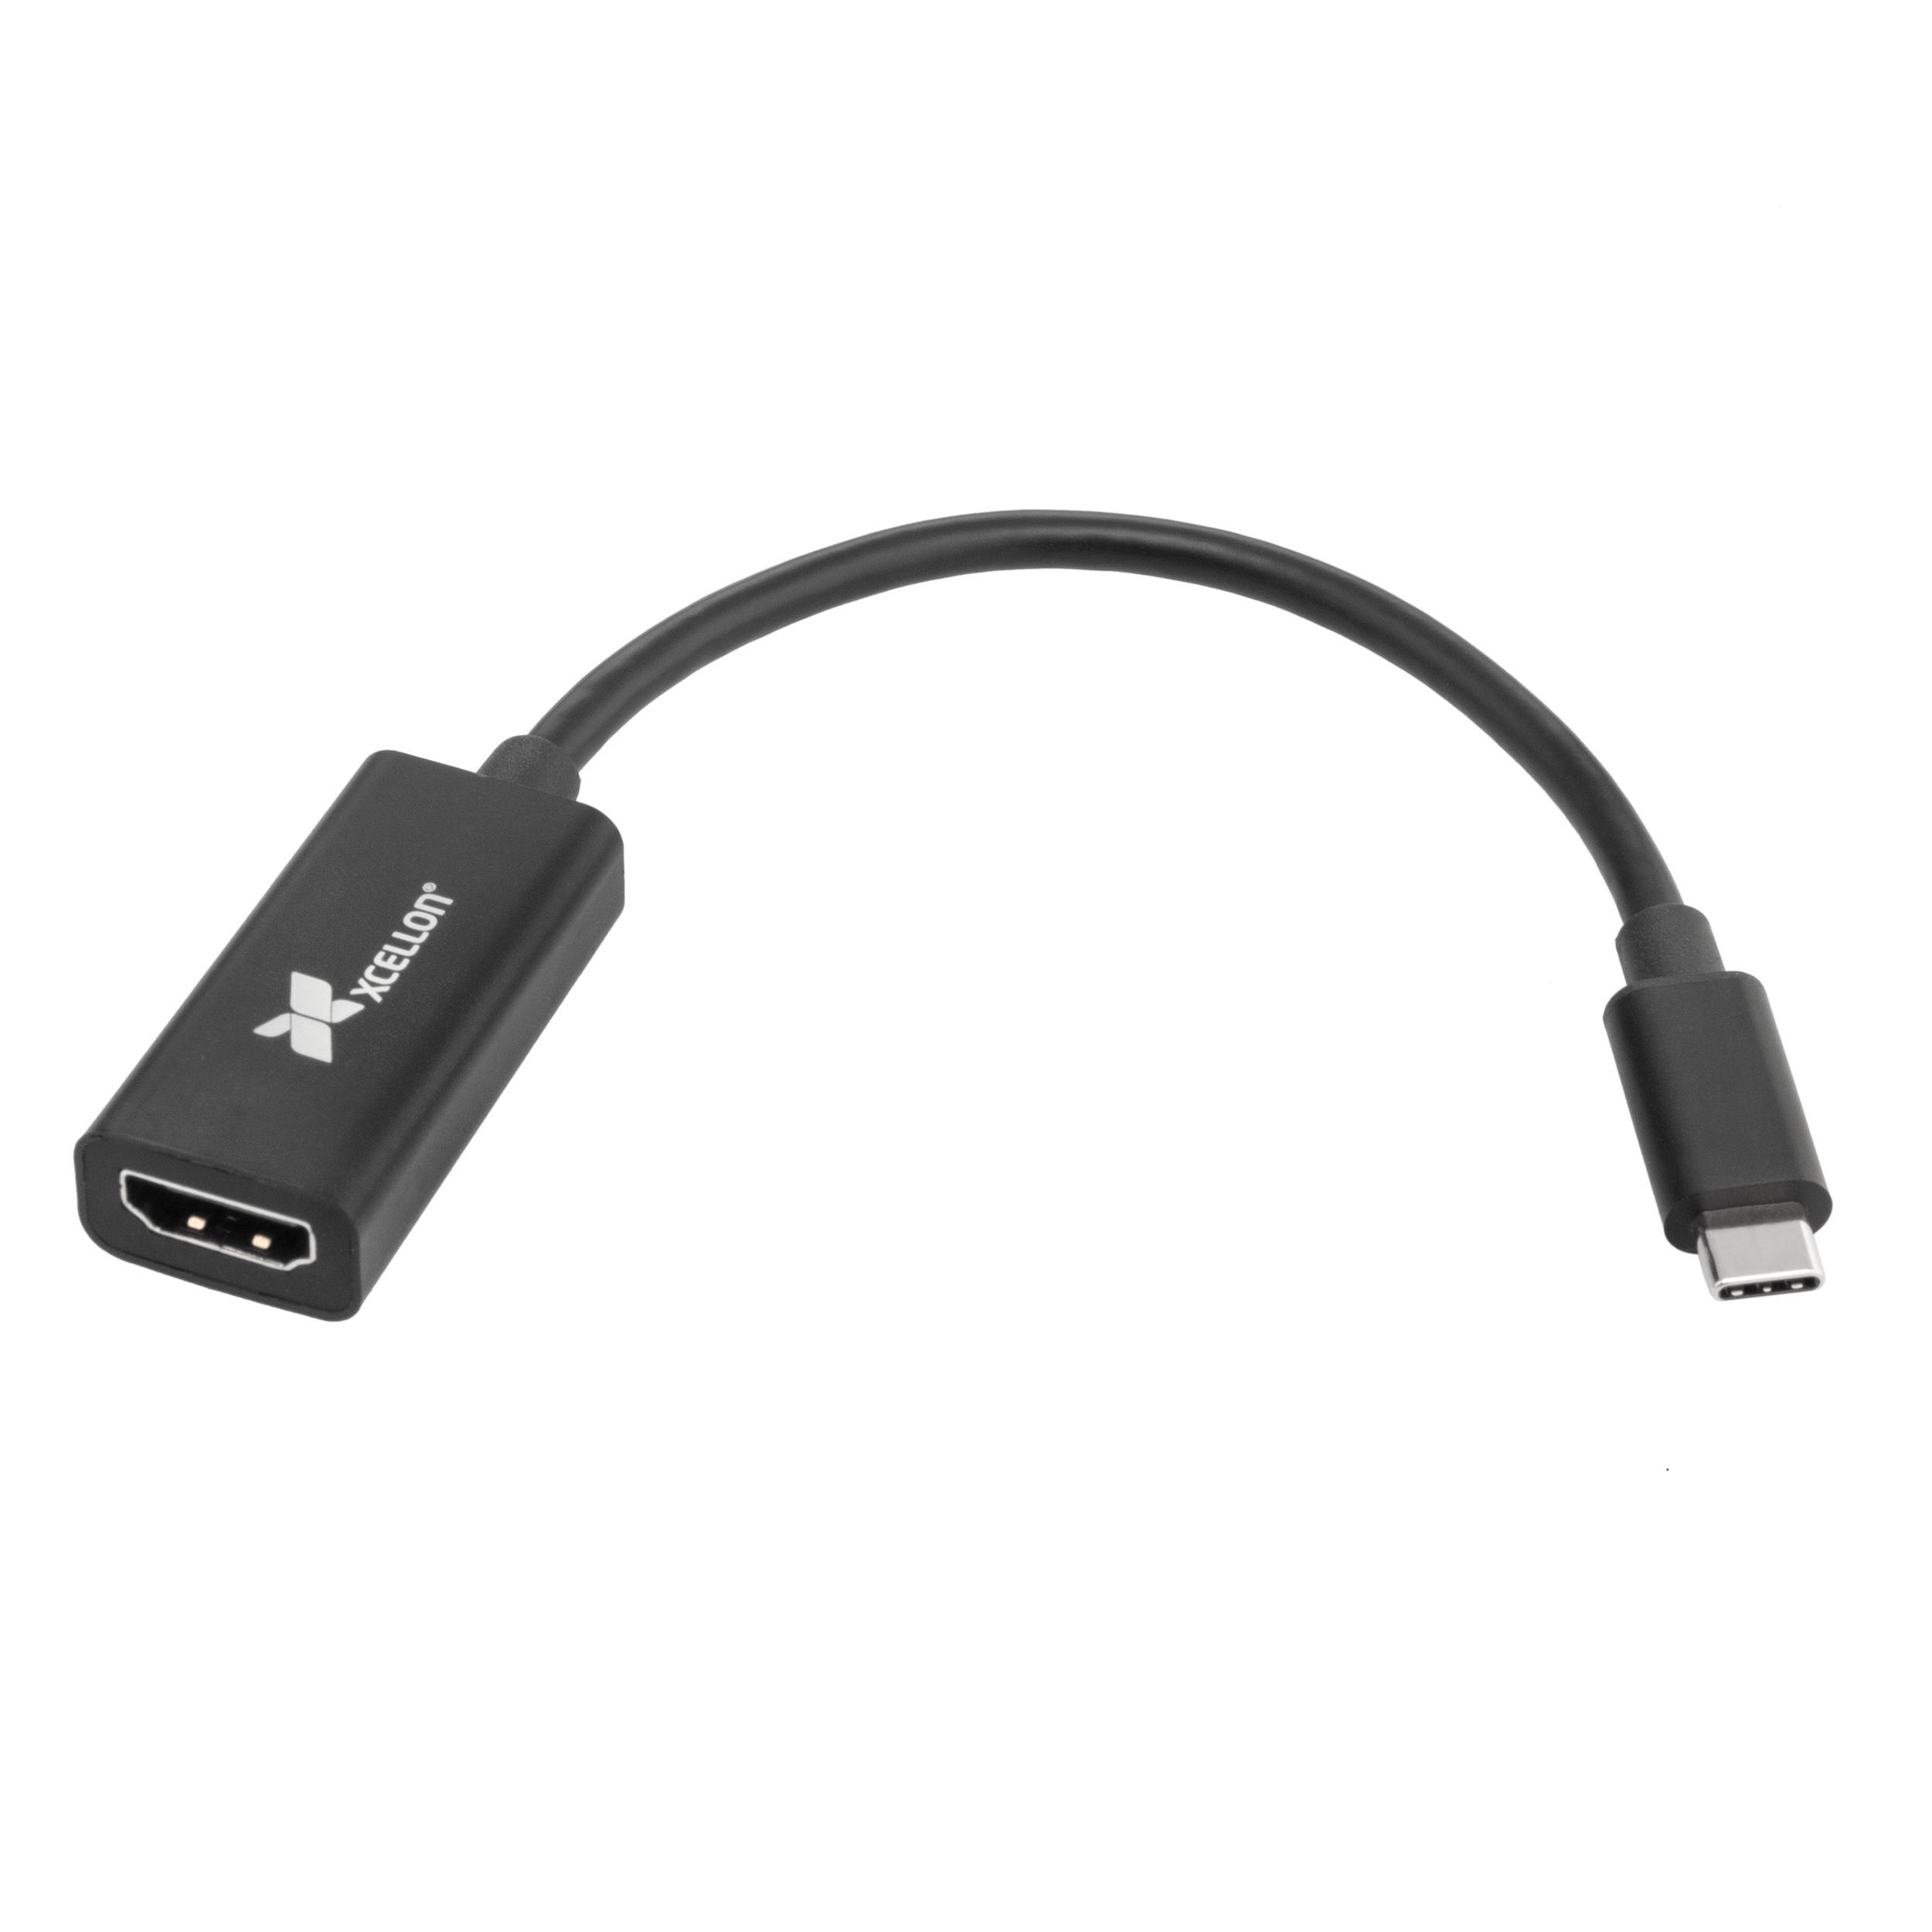 Xcellon USB Type-C to HDMI 4K Adapter